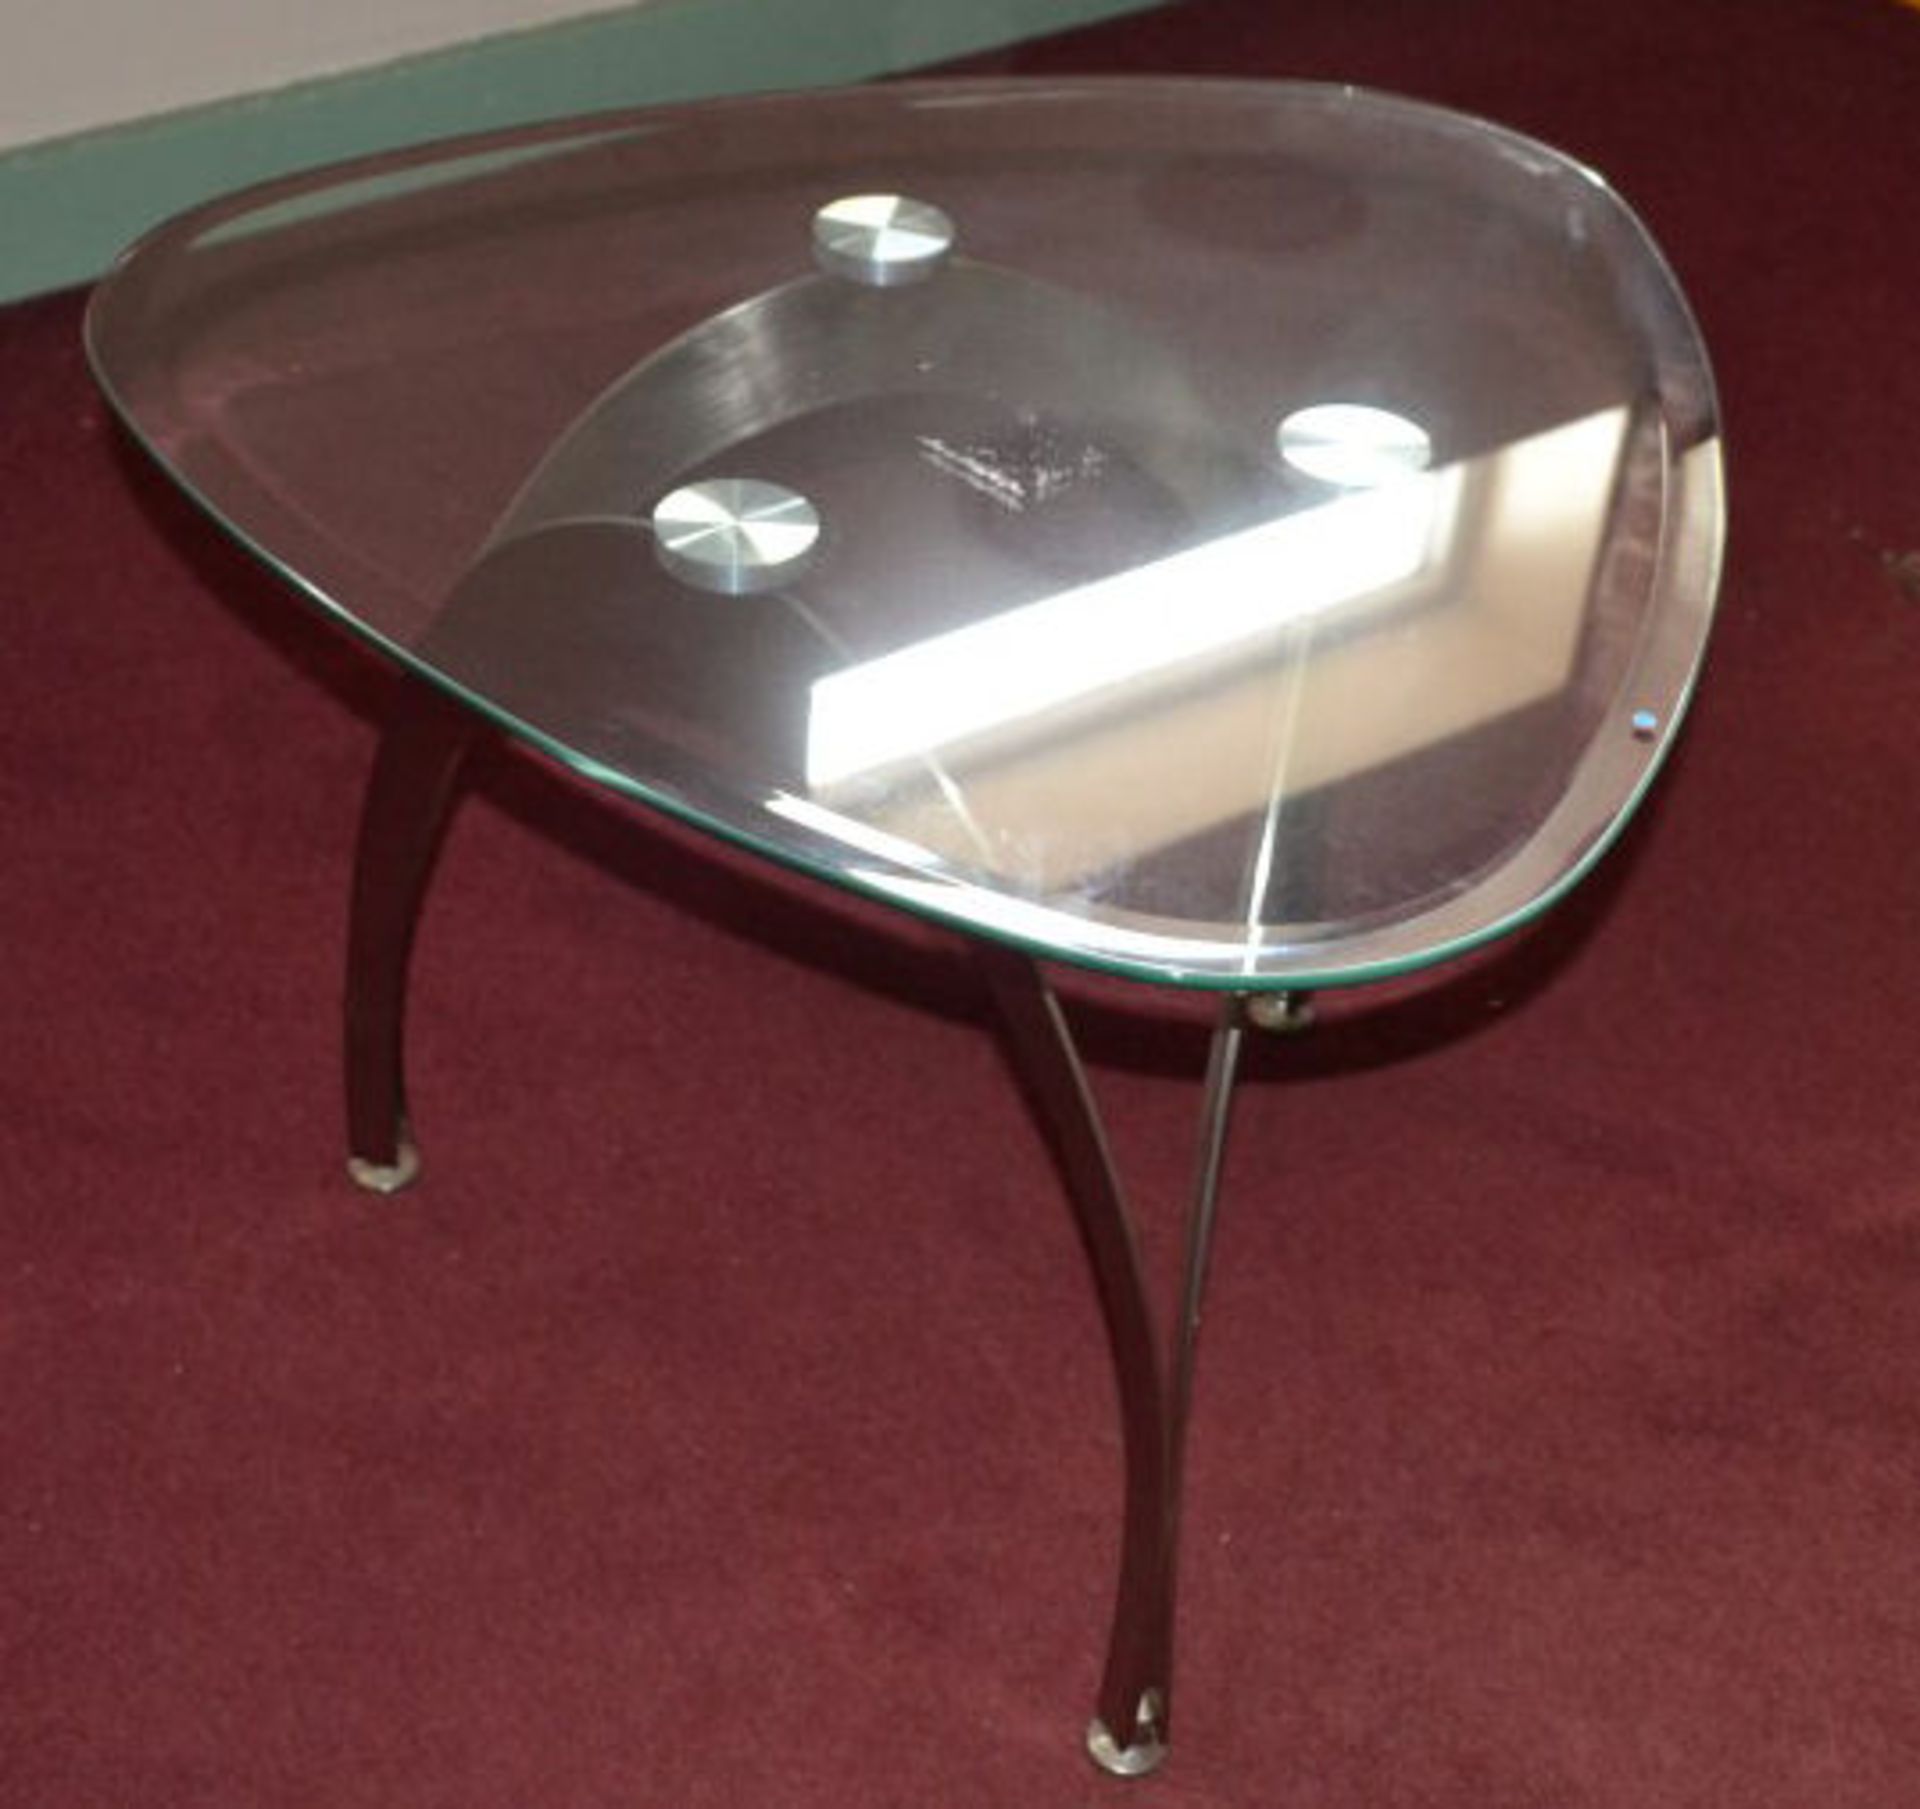 1 x Contemporary Triangular Glass Side Table with Satin Nickel Legs - Image 2 of 4